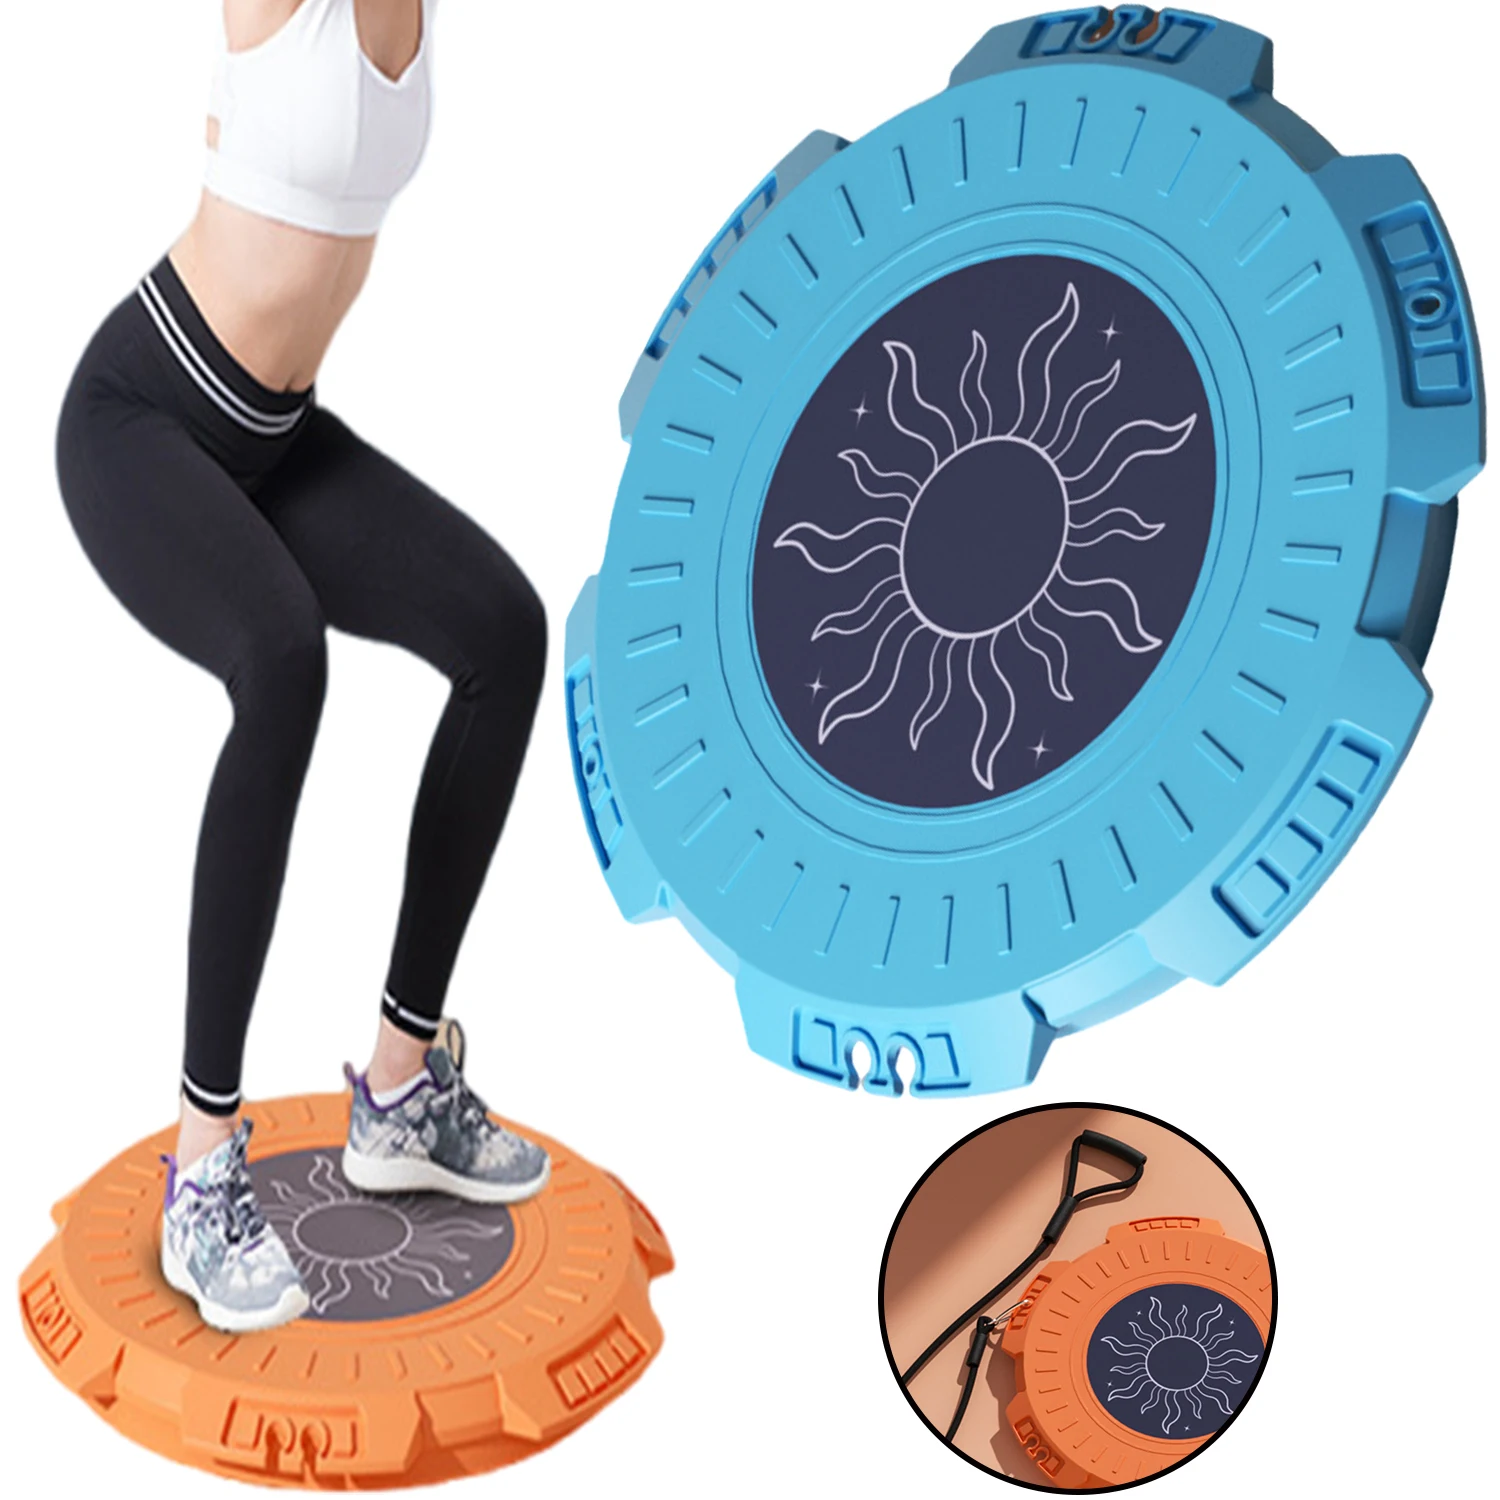 

Twister Board,11 inch Waist Twisting with Fitness Elastic Rope,Rotate Disc for Leg Waist Shaping Slimming Exercise Equipment